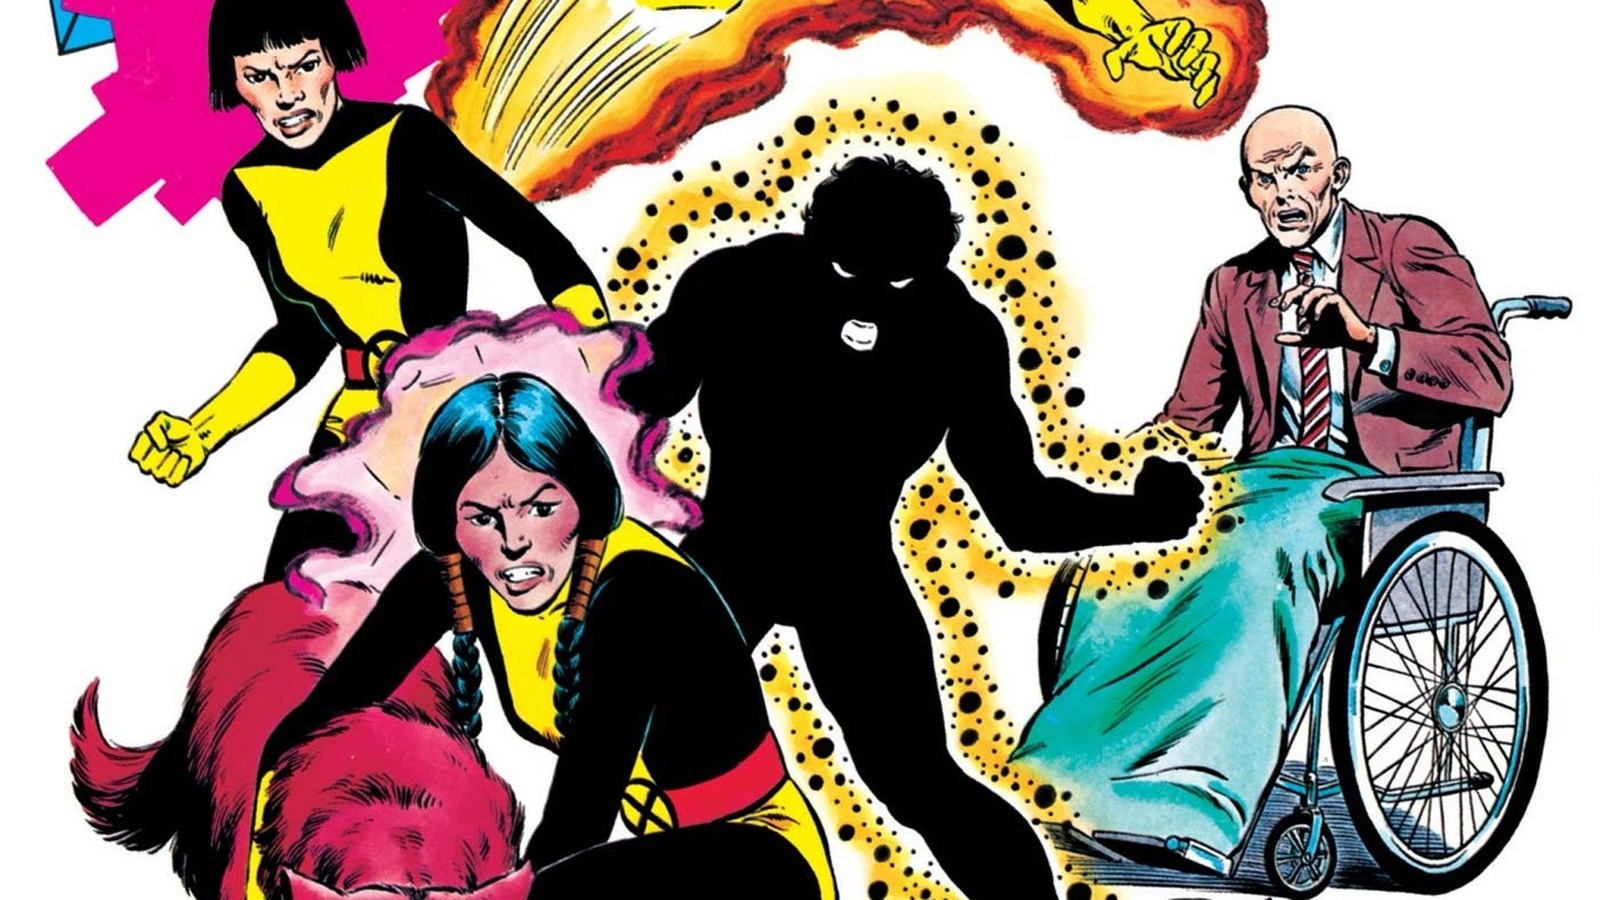 Marvel 'The New Mutants' Cast Web-Based Interview 